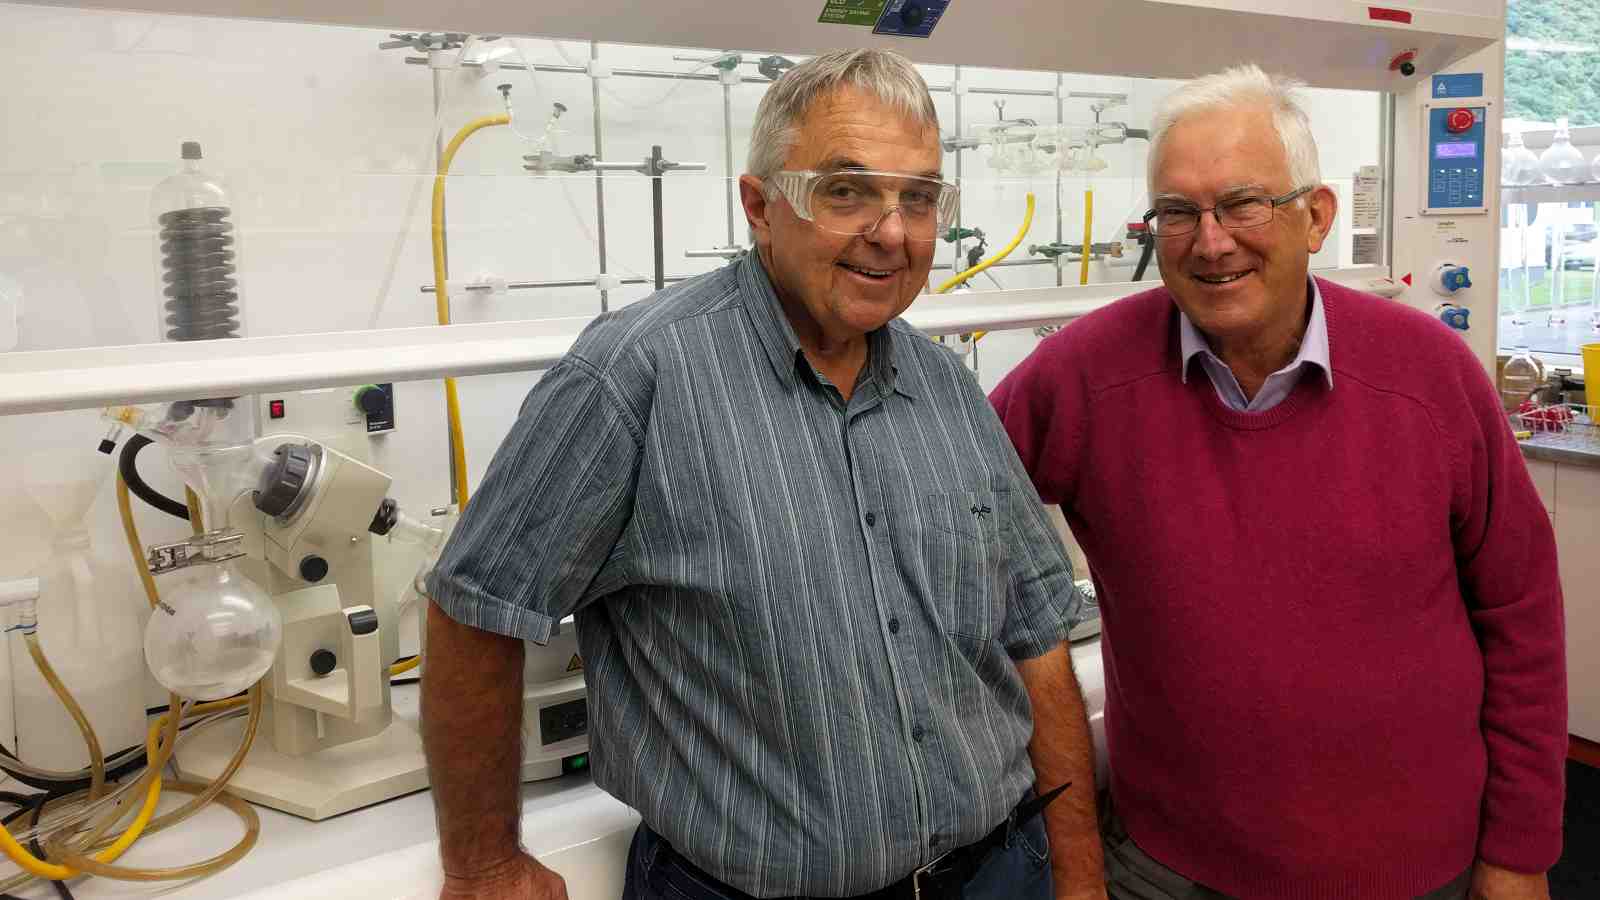 Peter Tyler and Richard Furneaux stand in a laboratory